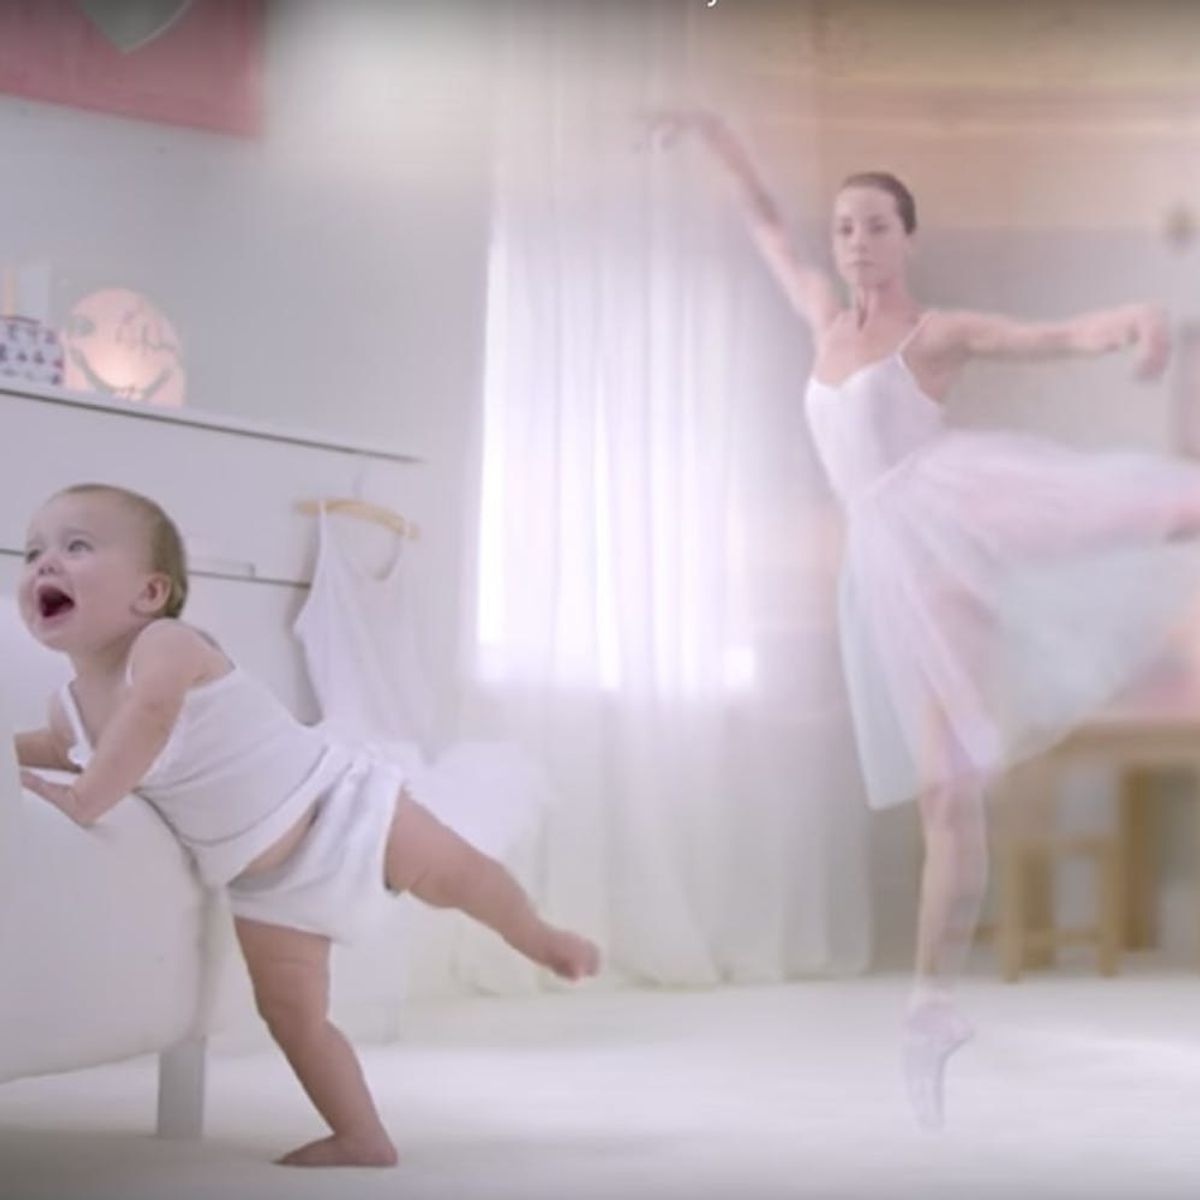 The UK Is Cracking Down on Gender Stereotypes in Advertising